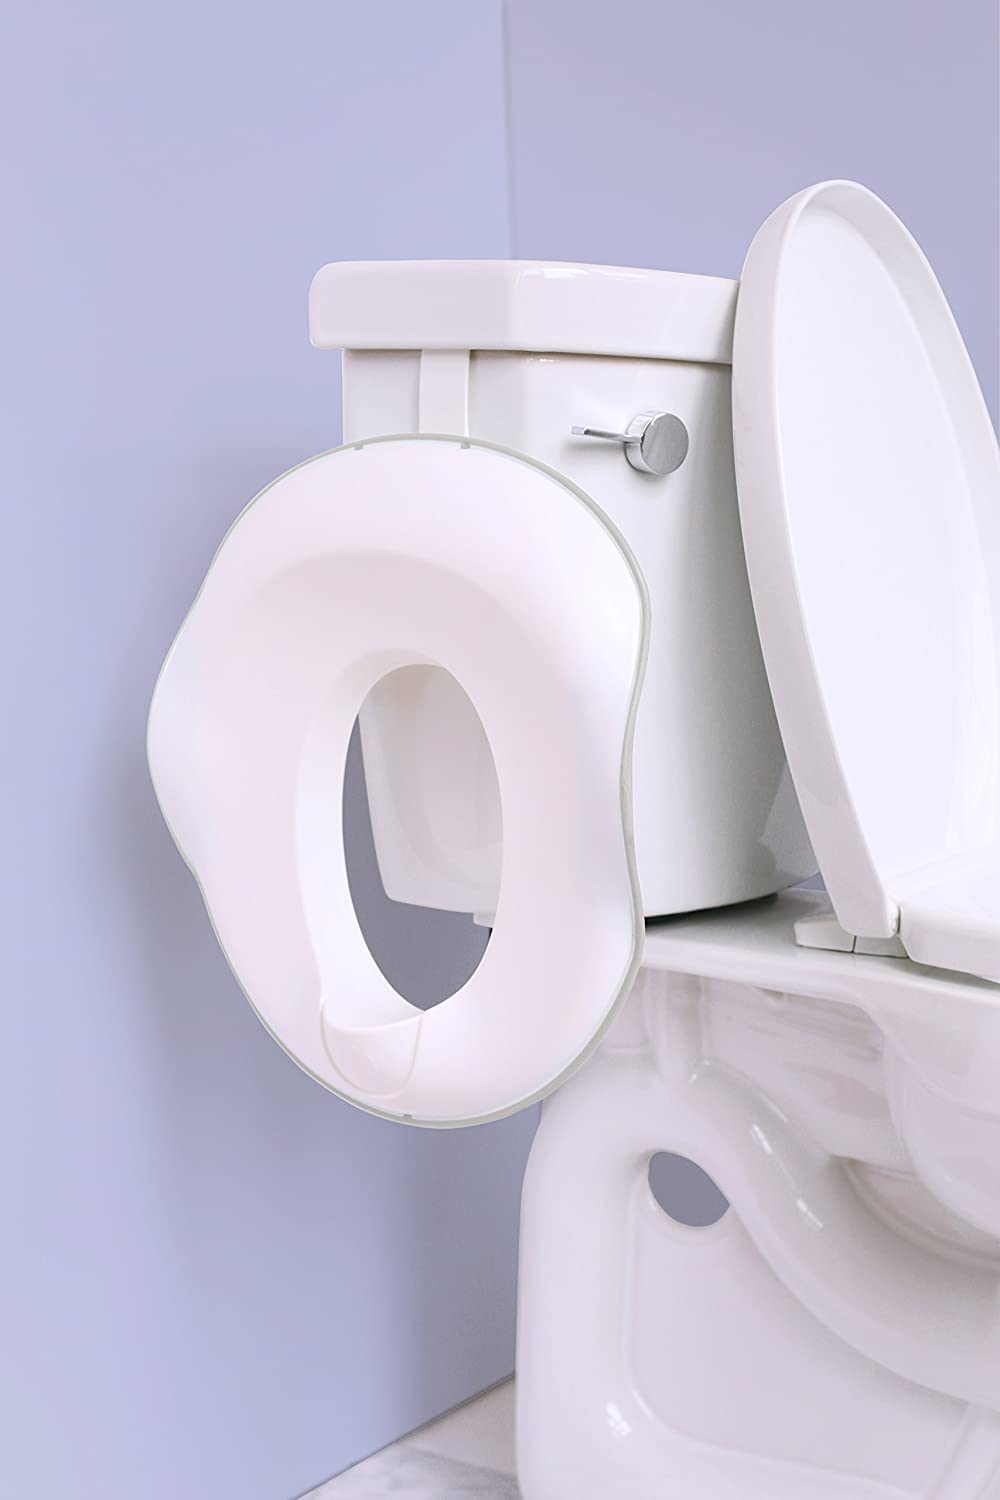 Ubbi Multi-Use Potty and Utility Hook, No Hardware Or Installation Needed, Durable and Sturdy to Hang Over Toilet Tank Or Door, White